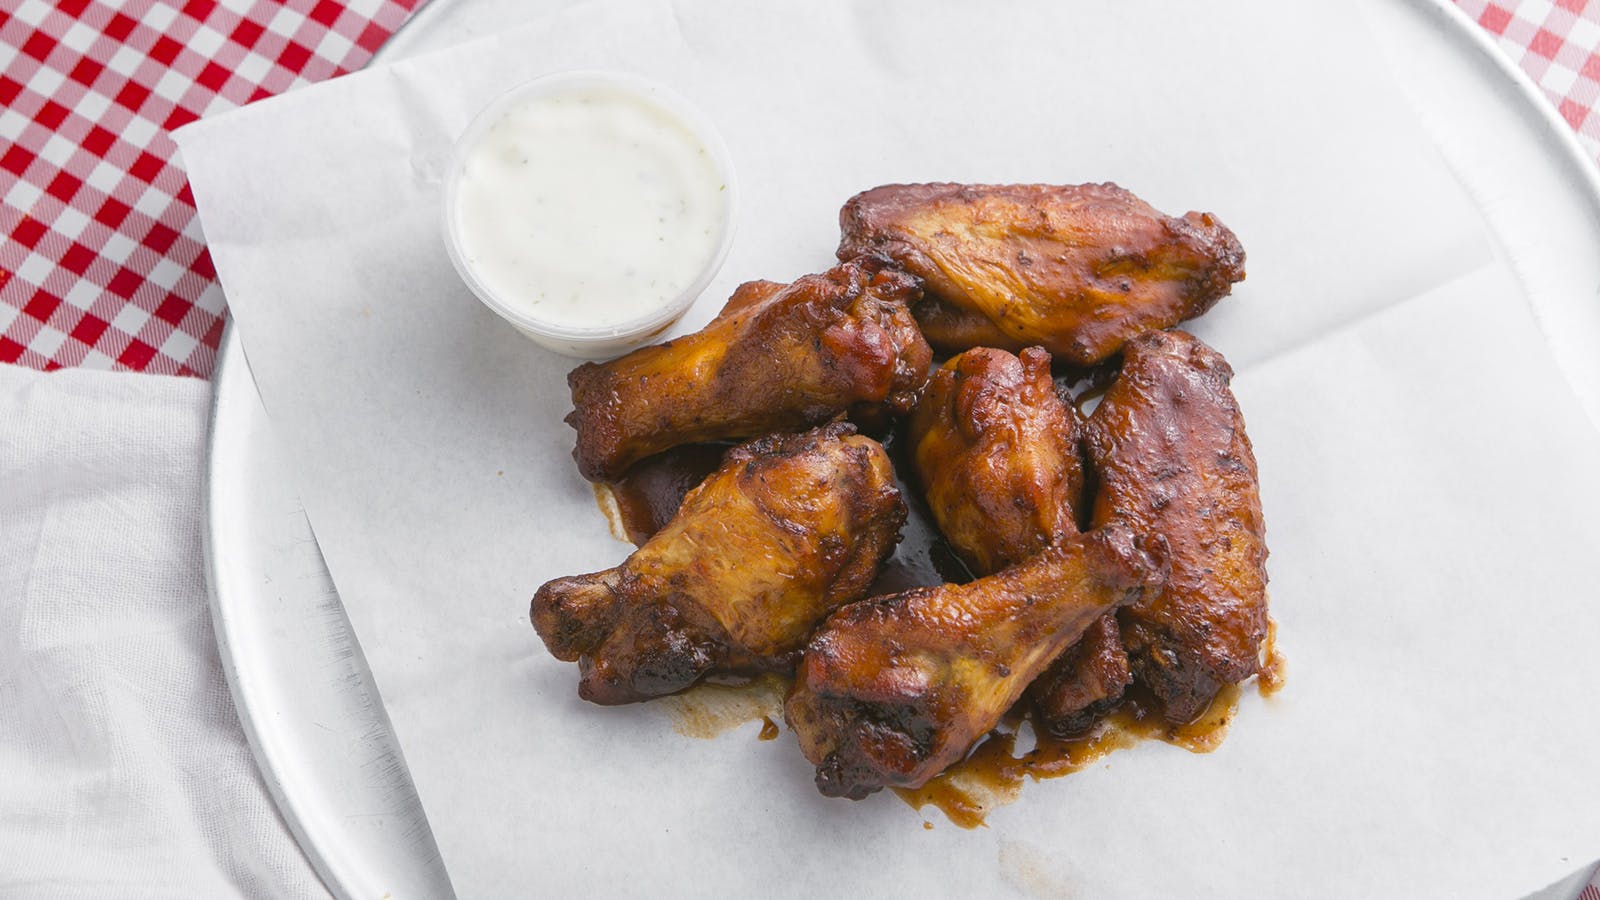 BBQ Wings from Aroma Pizza & Pasta in Lake Forest, CA